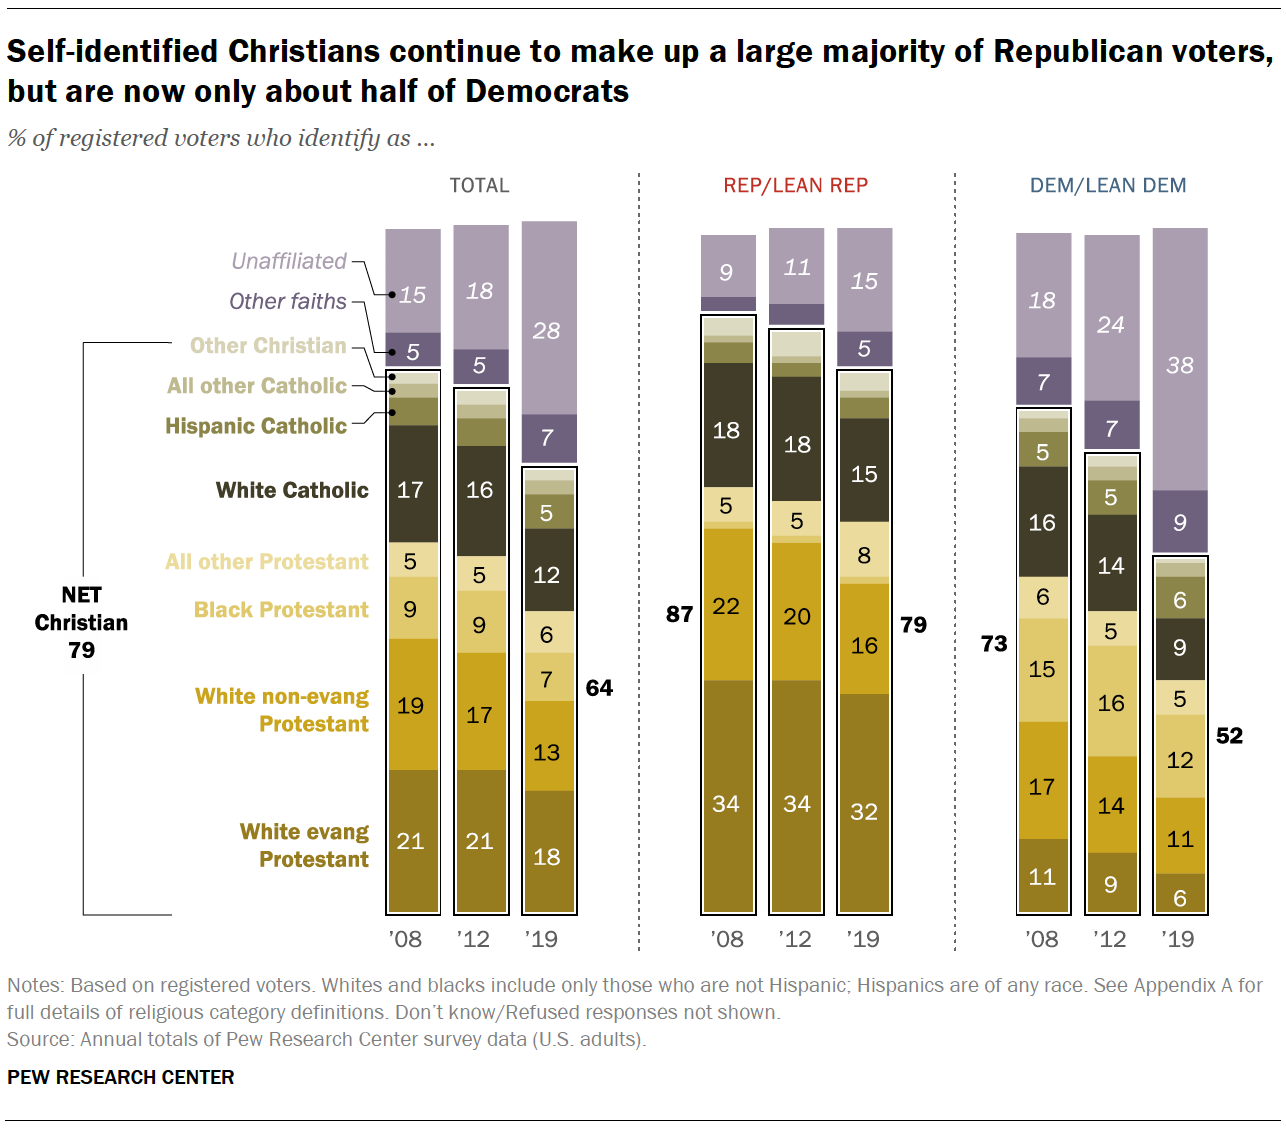 Self-identified Christians continue to make up a large majority of Republican voters, but are now only about half of Democrats